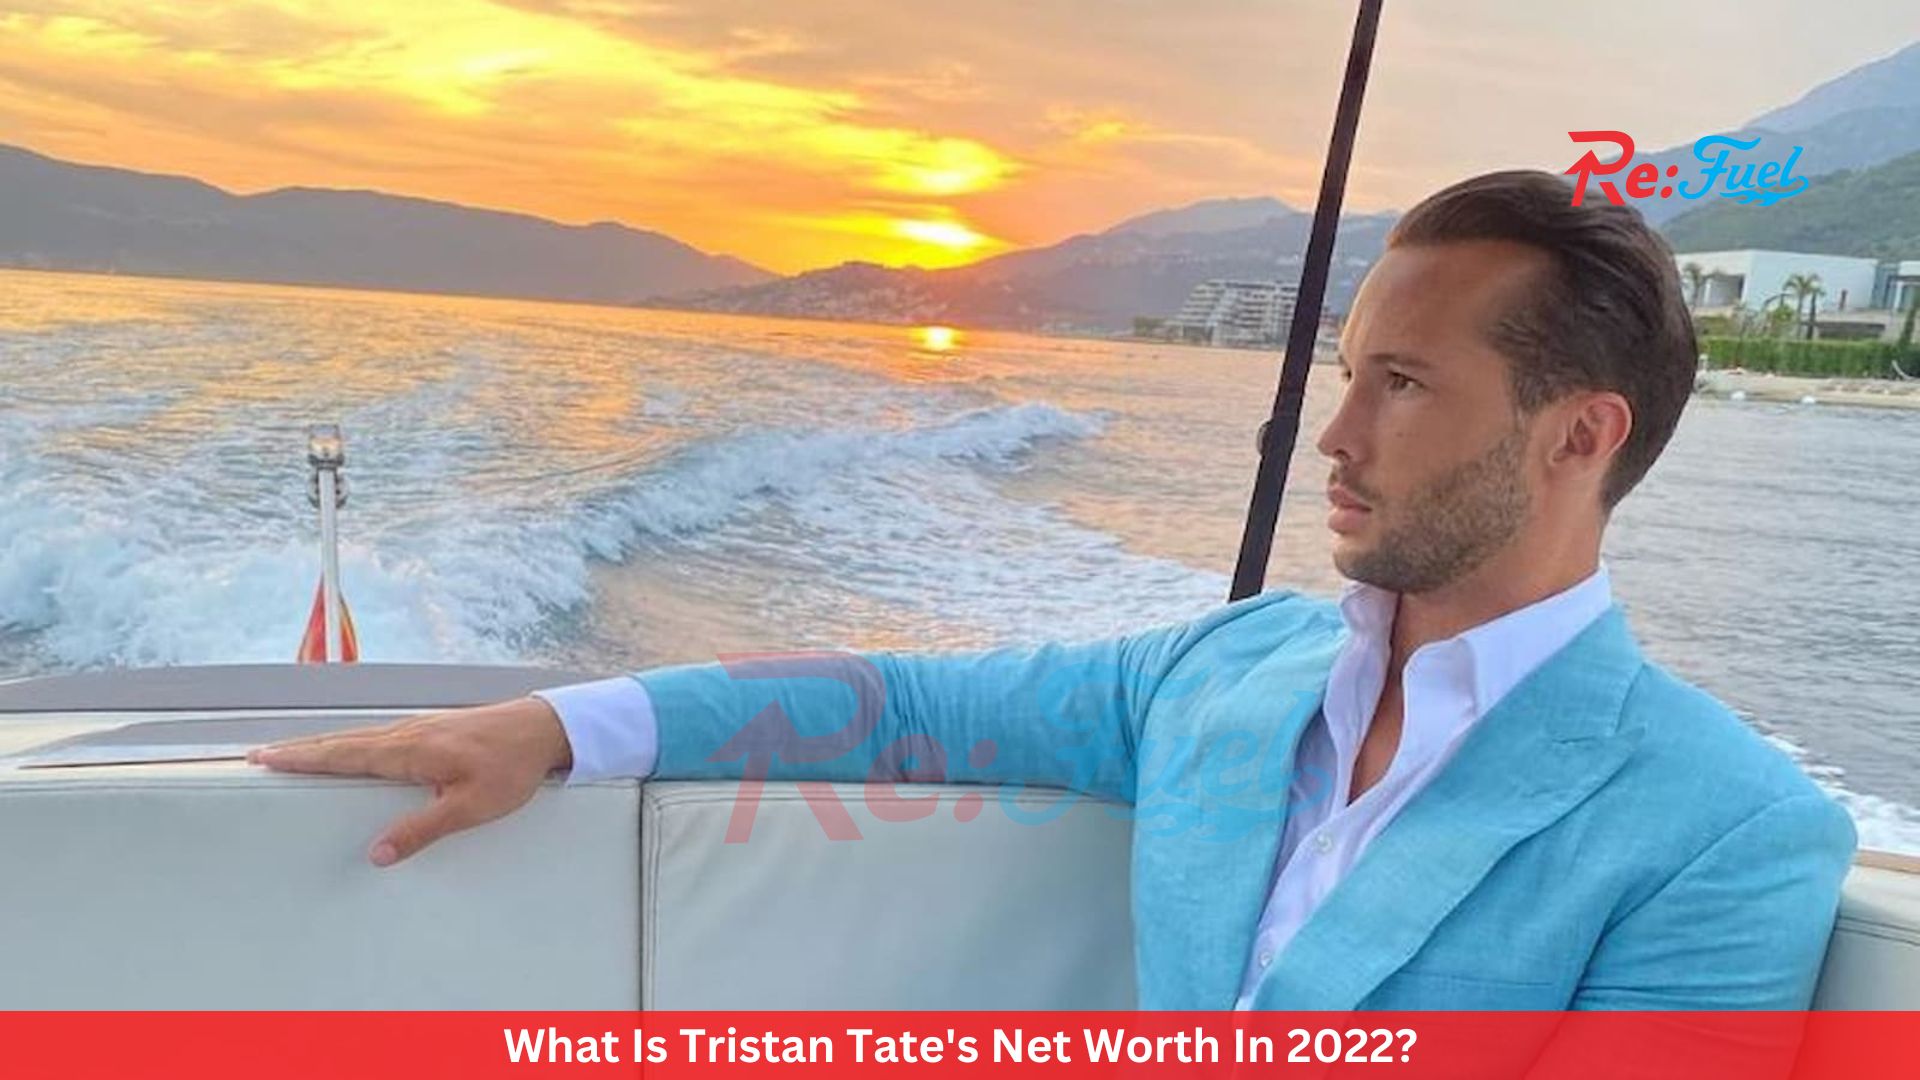 What Is Tristan Tate's Net Worth In 2022?